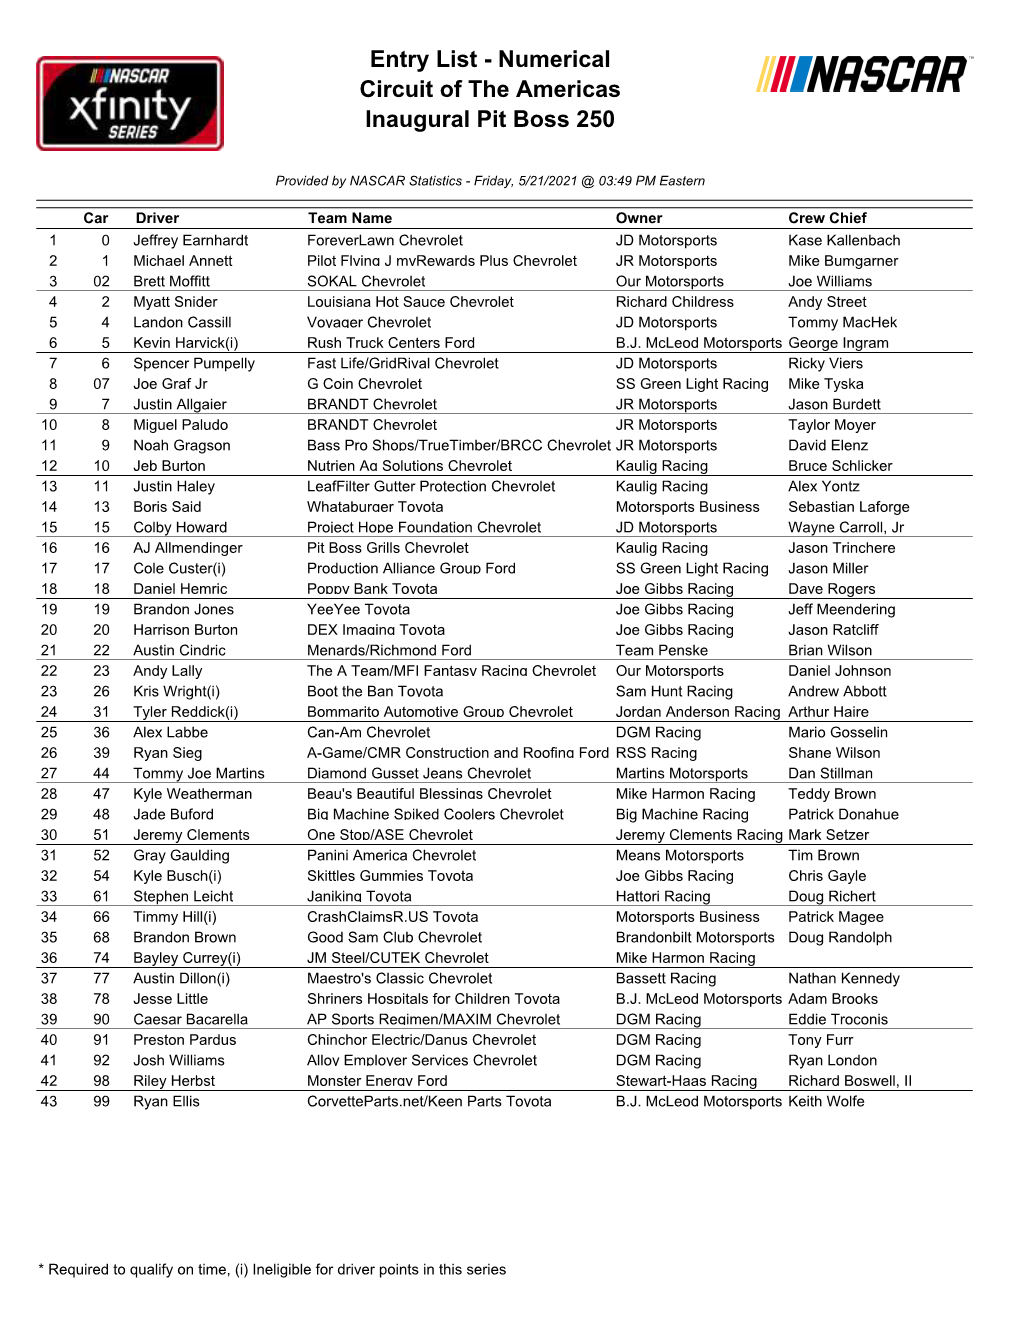 Entry List - Numerical Circuit of the Americas Inaugural Pit Boss 250